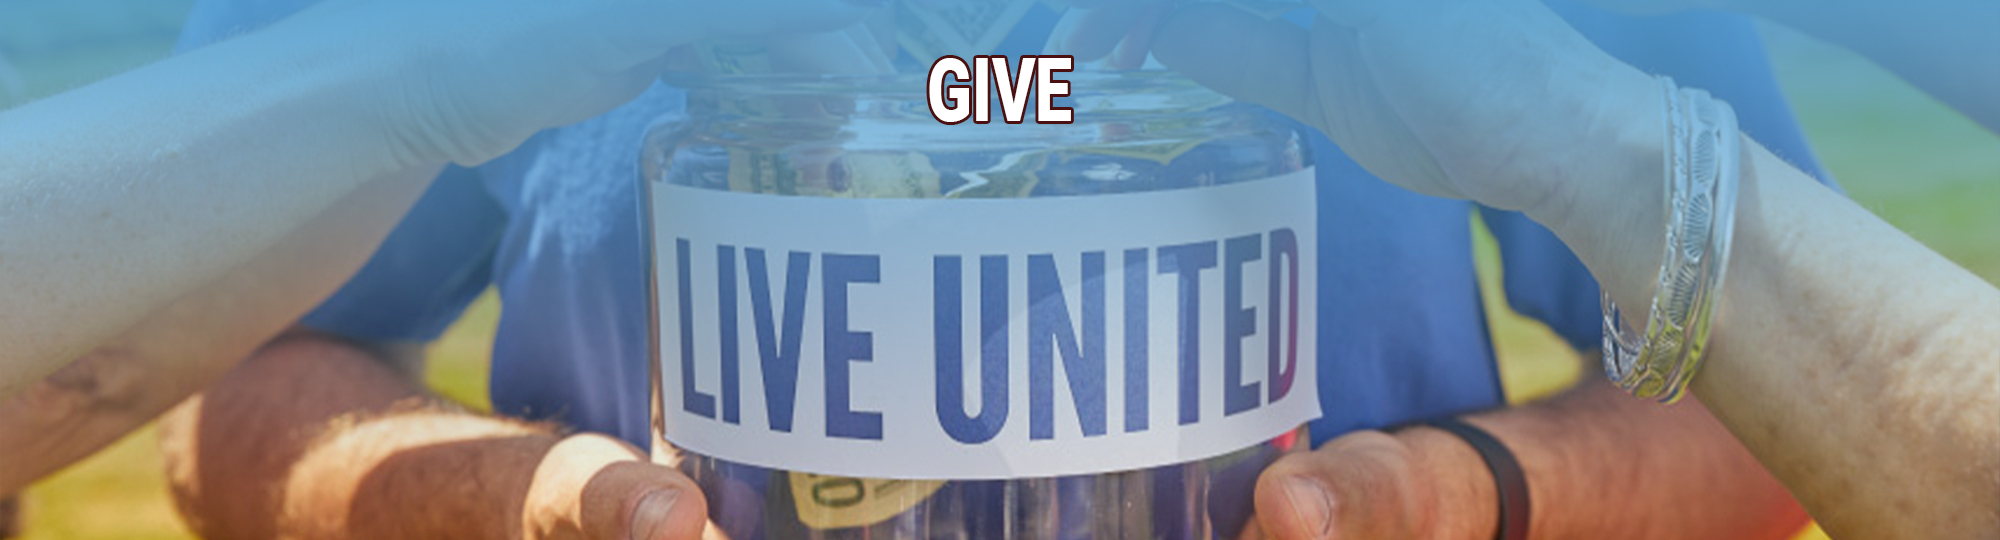 Donate Today - Give